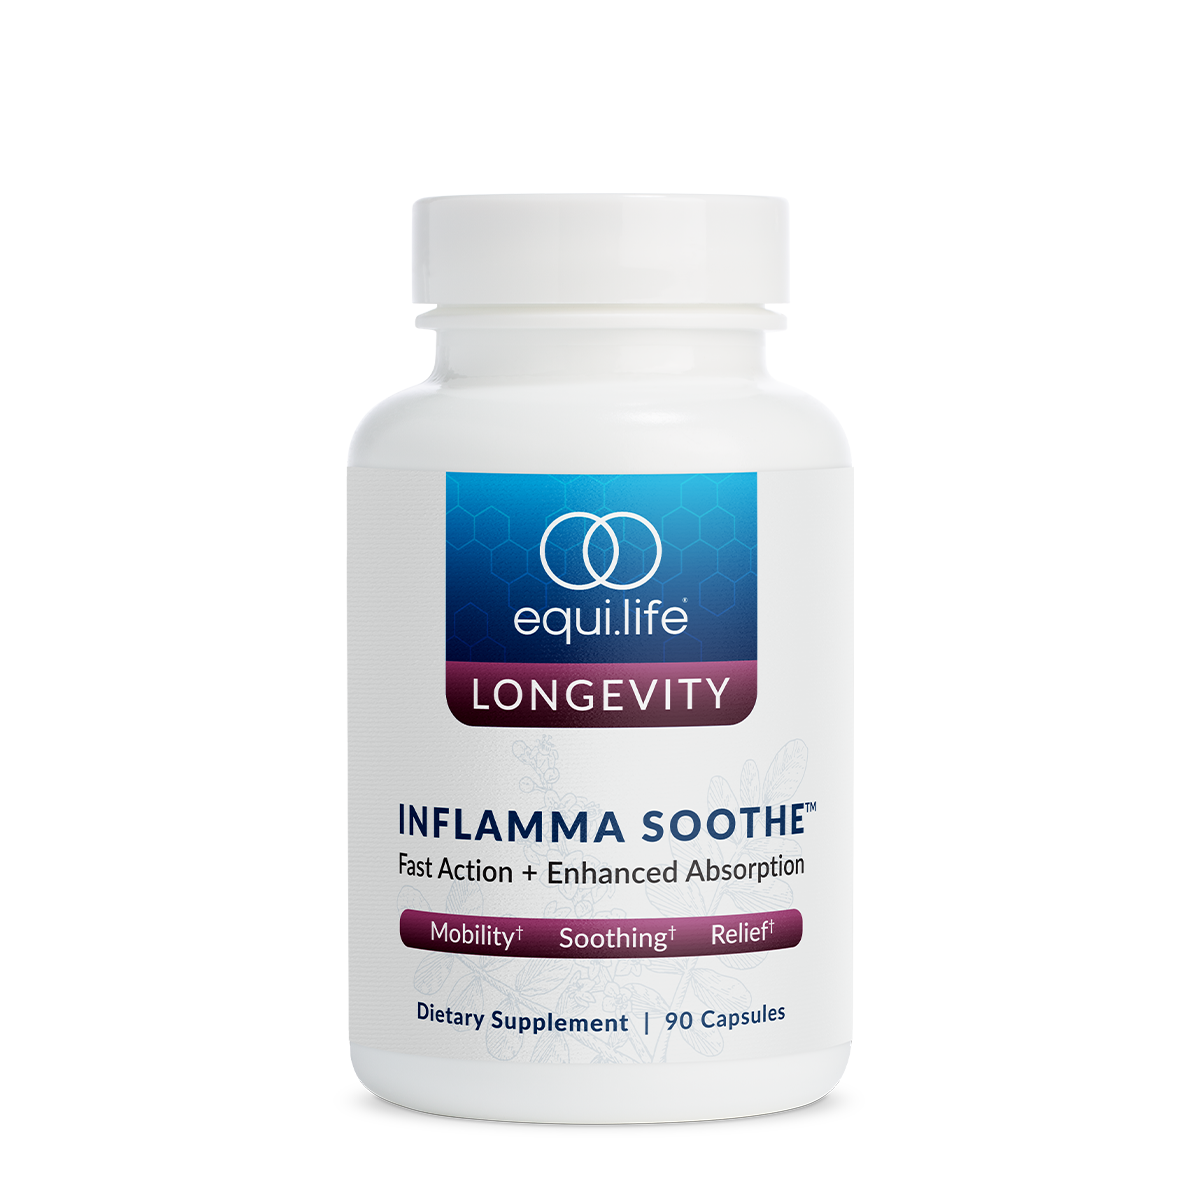 EquiLife Inflamma Soothe